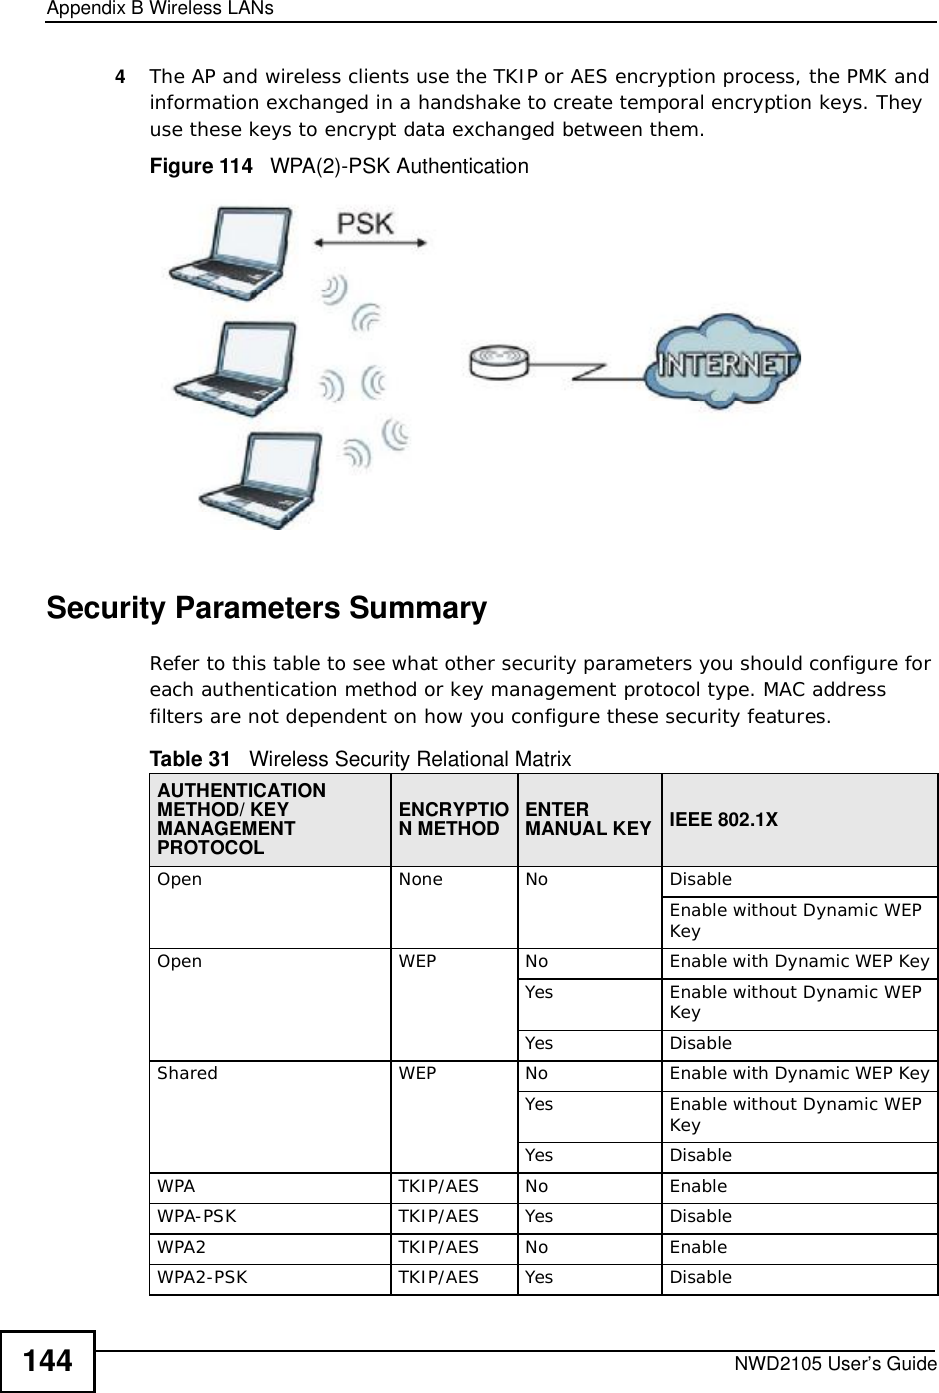 Appendix BWireless LANsNWD2105 User’s Guide1444The AP and wireless clients use the TKIP or AES encryption process, the PMK and information exchanged in a handshake to create temporal encryption keys. They use these keys to encrypt data exchanged between them.Figure 114   WPA(2)-PSK AuthenticationSecurity Parameters SummaryRefer to this table to see what other security parameters you should configure for each authentication method or key management protocol type. MAC address filters are not dependent on how you configure these security features.Table 31   Wireless Security Relational MatrixAUTHENTICATIONMETHOD/ KEY MANAGEMENTPROTOCOLENCRYPTION METHOD ENTERMANUAL KEY IEEE 802.1XOpenNoneNoDisableEnable without Dynamic WEP KeyOpen WEP No           Enable with Dynamic WEP KeyYes Enable without Dynamic WEP KeyYes DisableShared WEP  No           Enable with Dynamic WEP KeyYes Enable without Dynamic WEP KeyYes DisableWPA  TKIP/AES No EnableWPA-PSK  TKIP/AES Yes DisableWPA2 TKIP/AES No EnableWPA2-PSK  TKIP/AES Yes Disable